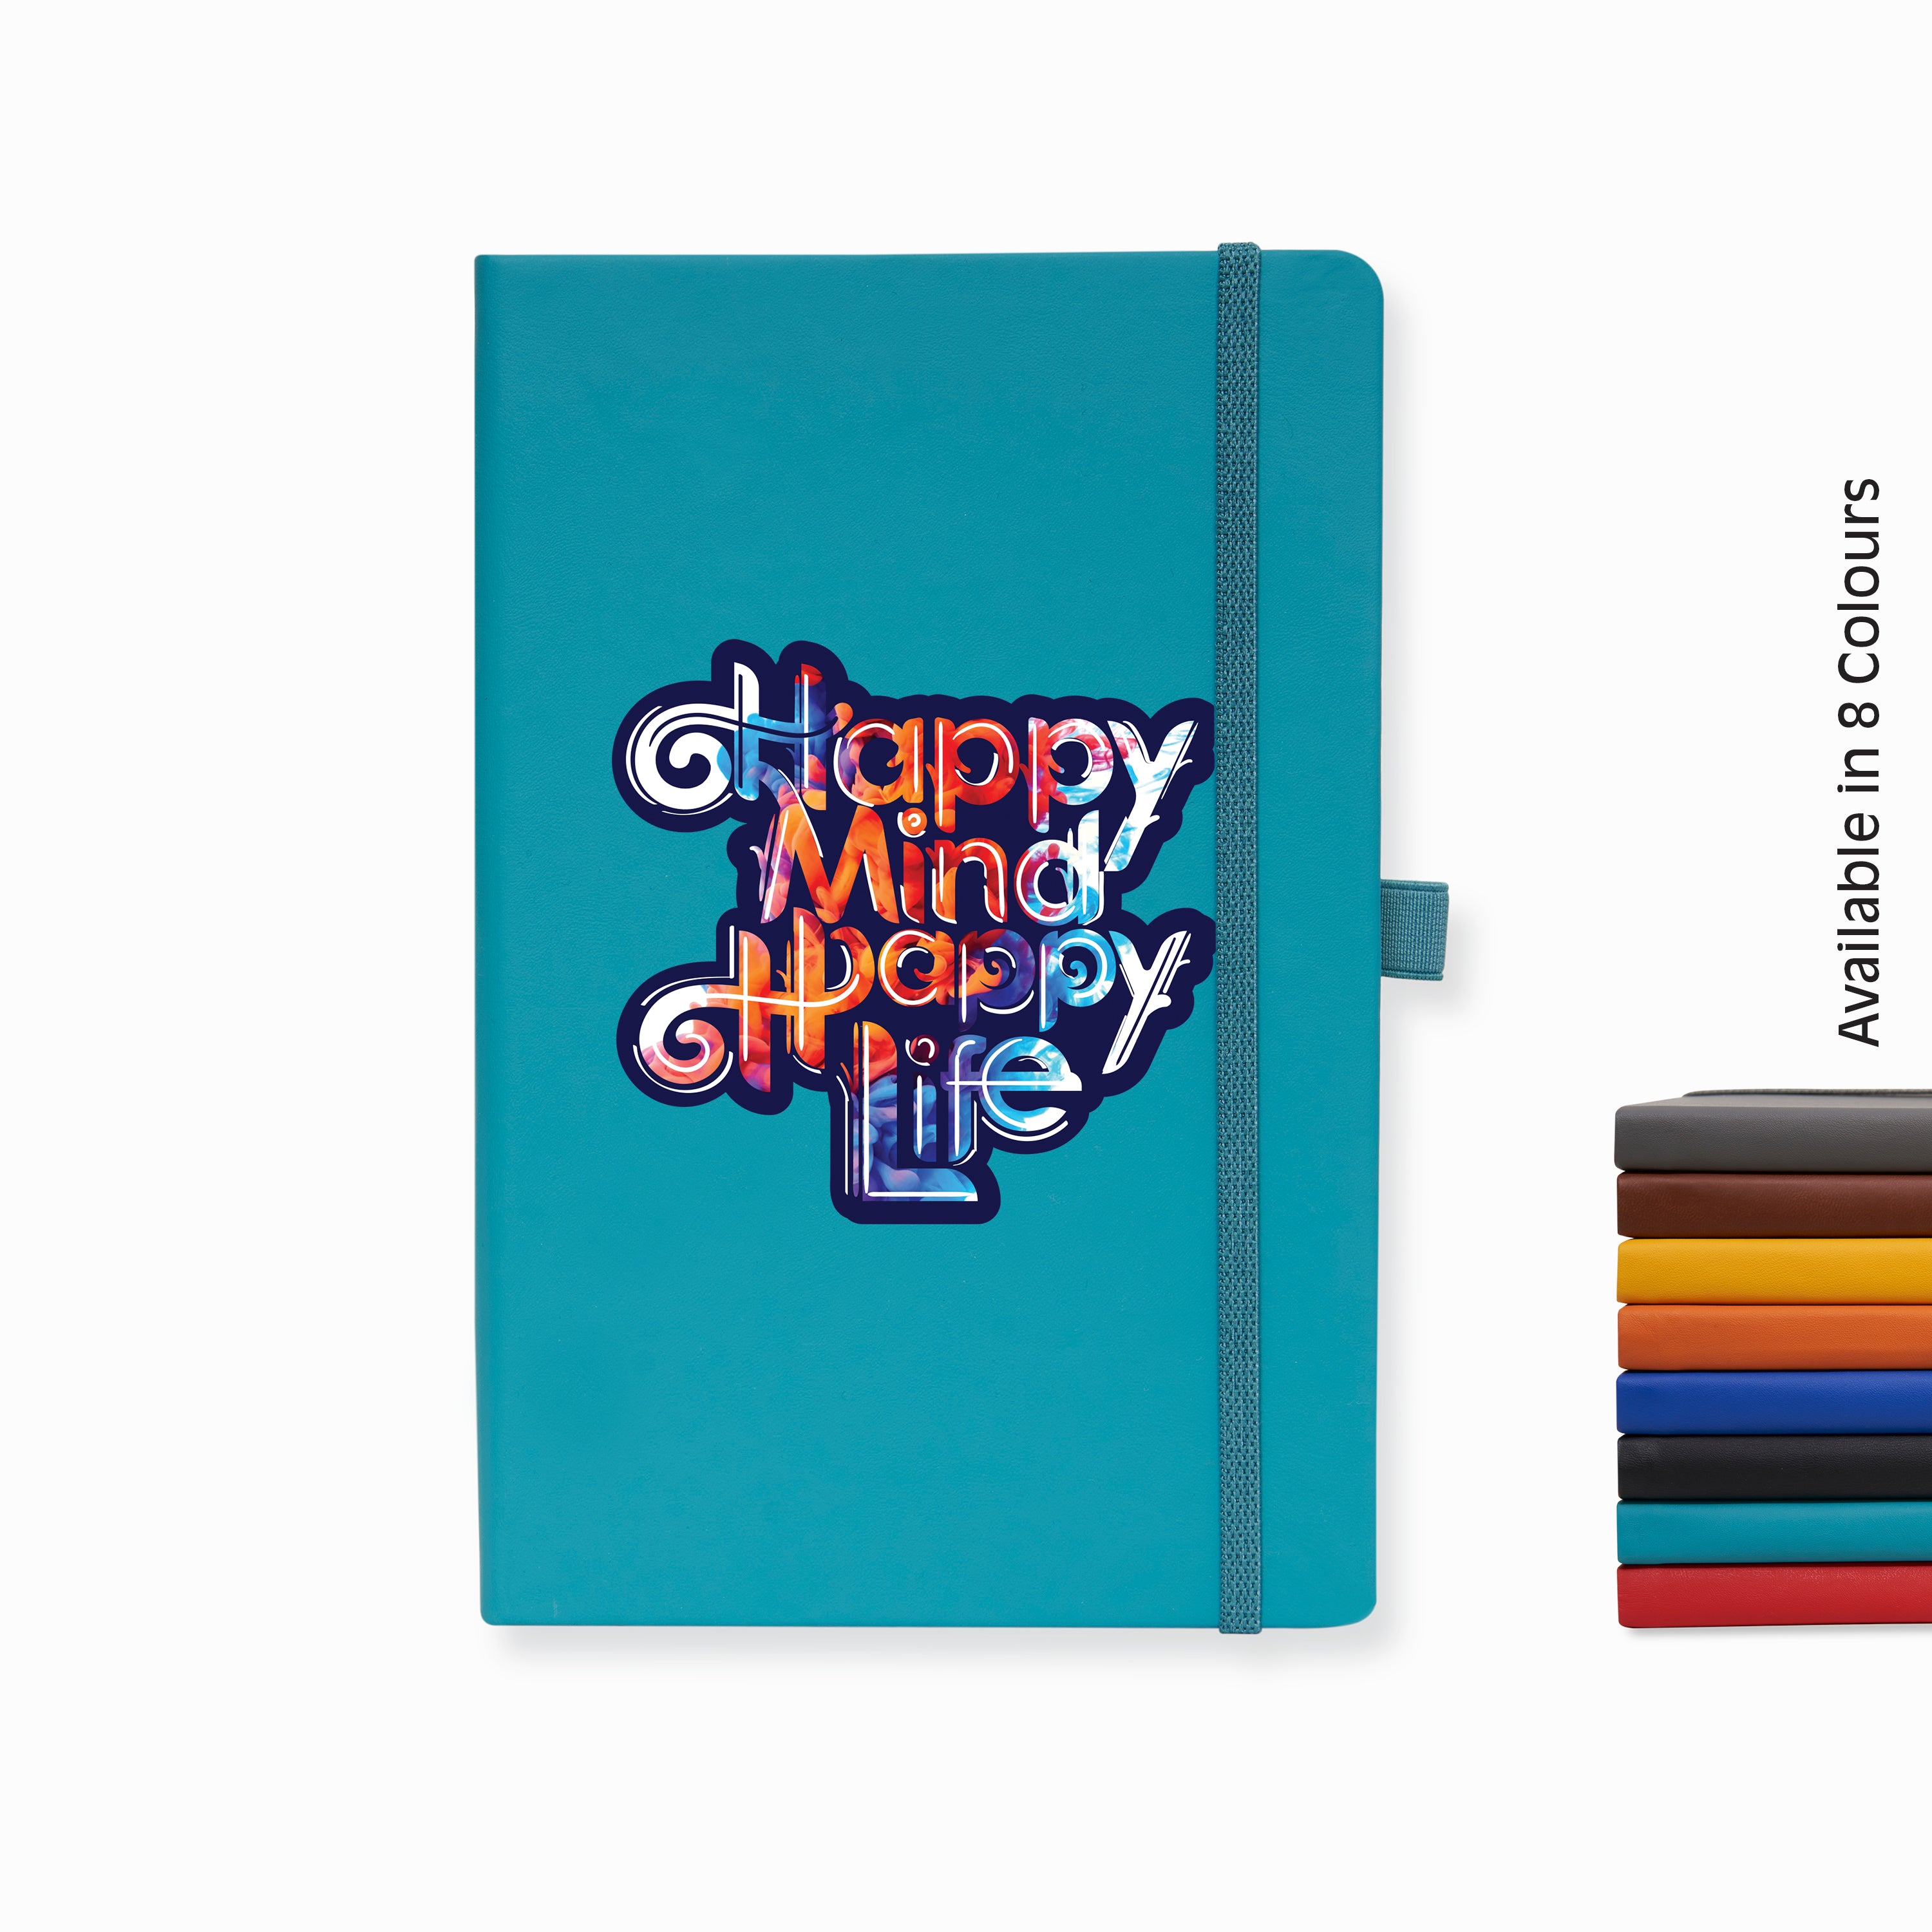 Doodle Pro Series Executive A5 PU Leather Hardbound Ruled Turkish Blue Notebook with Pen Loop [Happy Mind Happy Life]